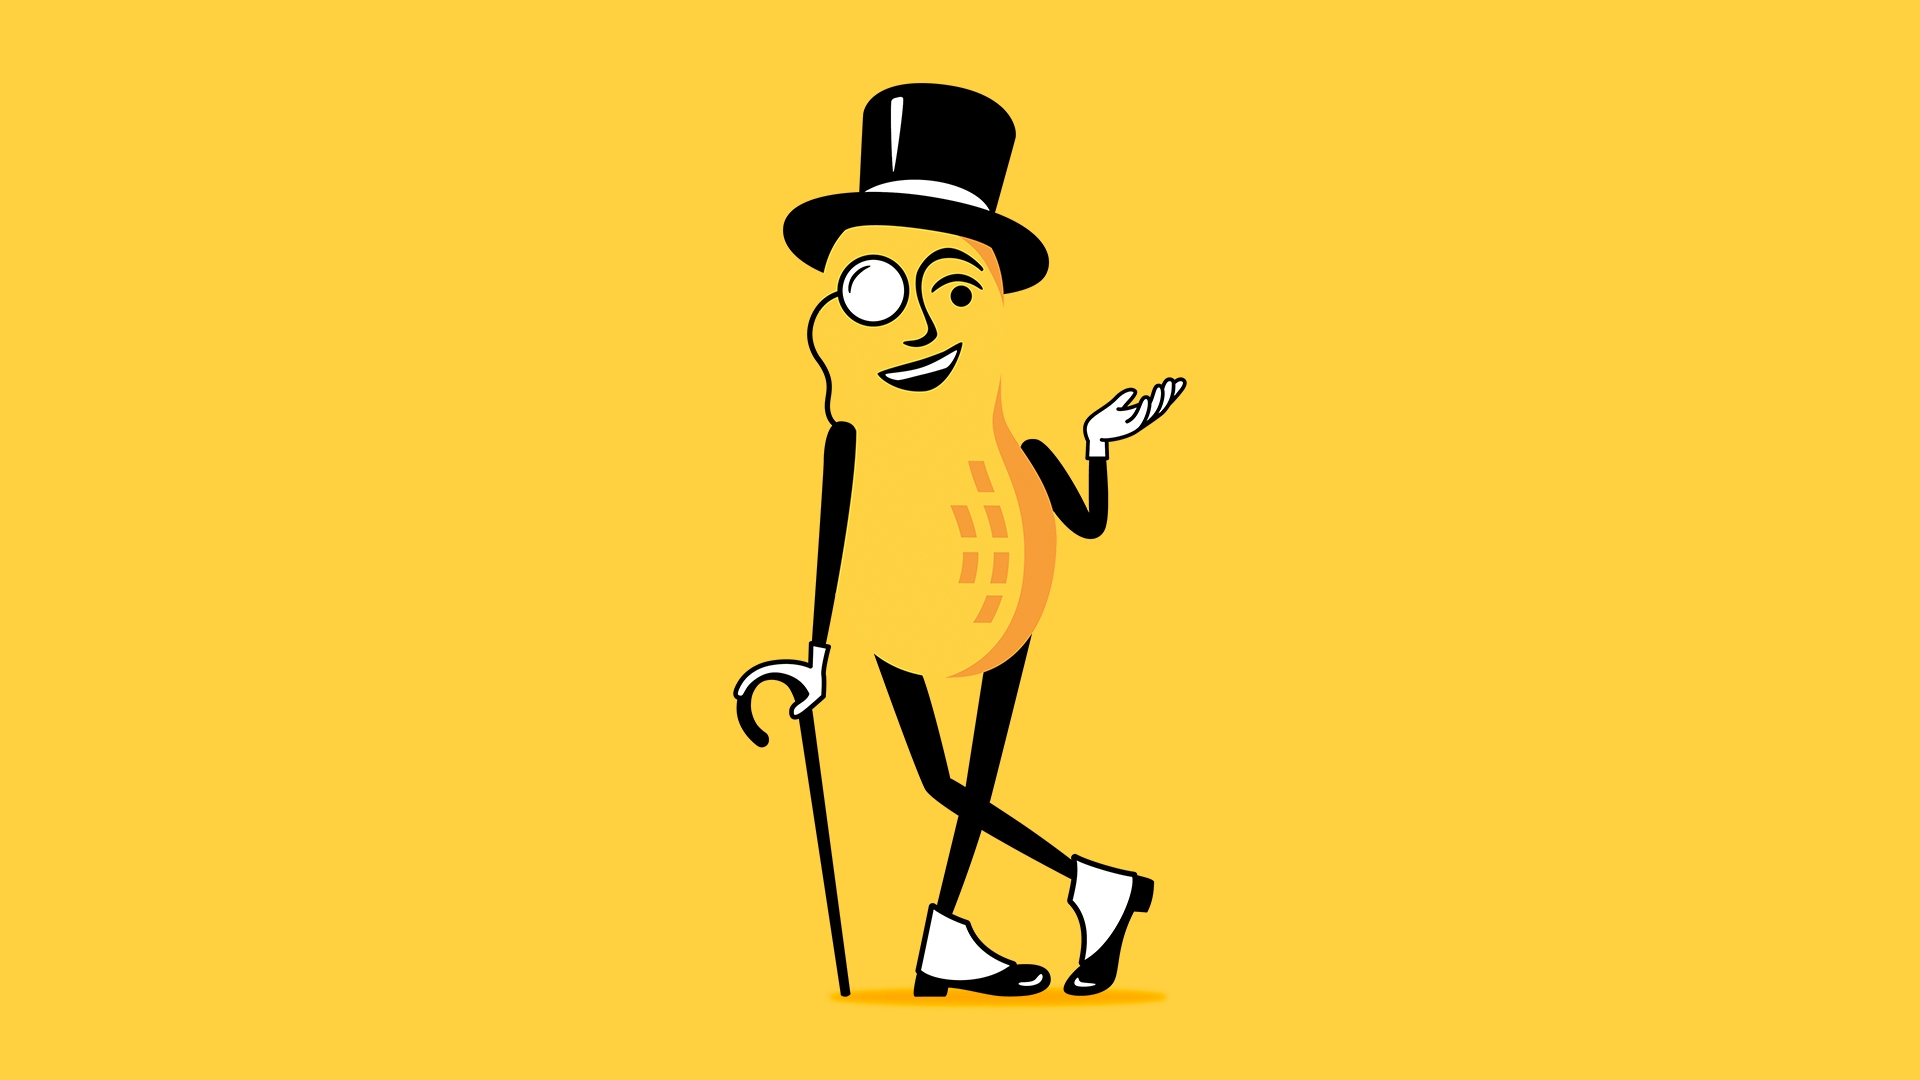 MR. PEANUT Shelling out $5 Million to Reward Little Acts of Extraordinary Substance Starting Big Game |